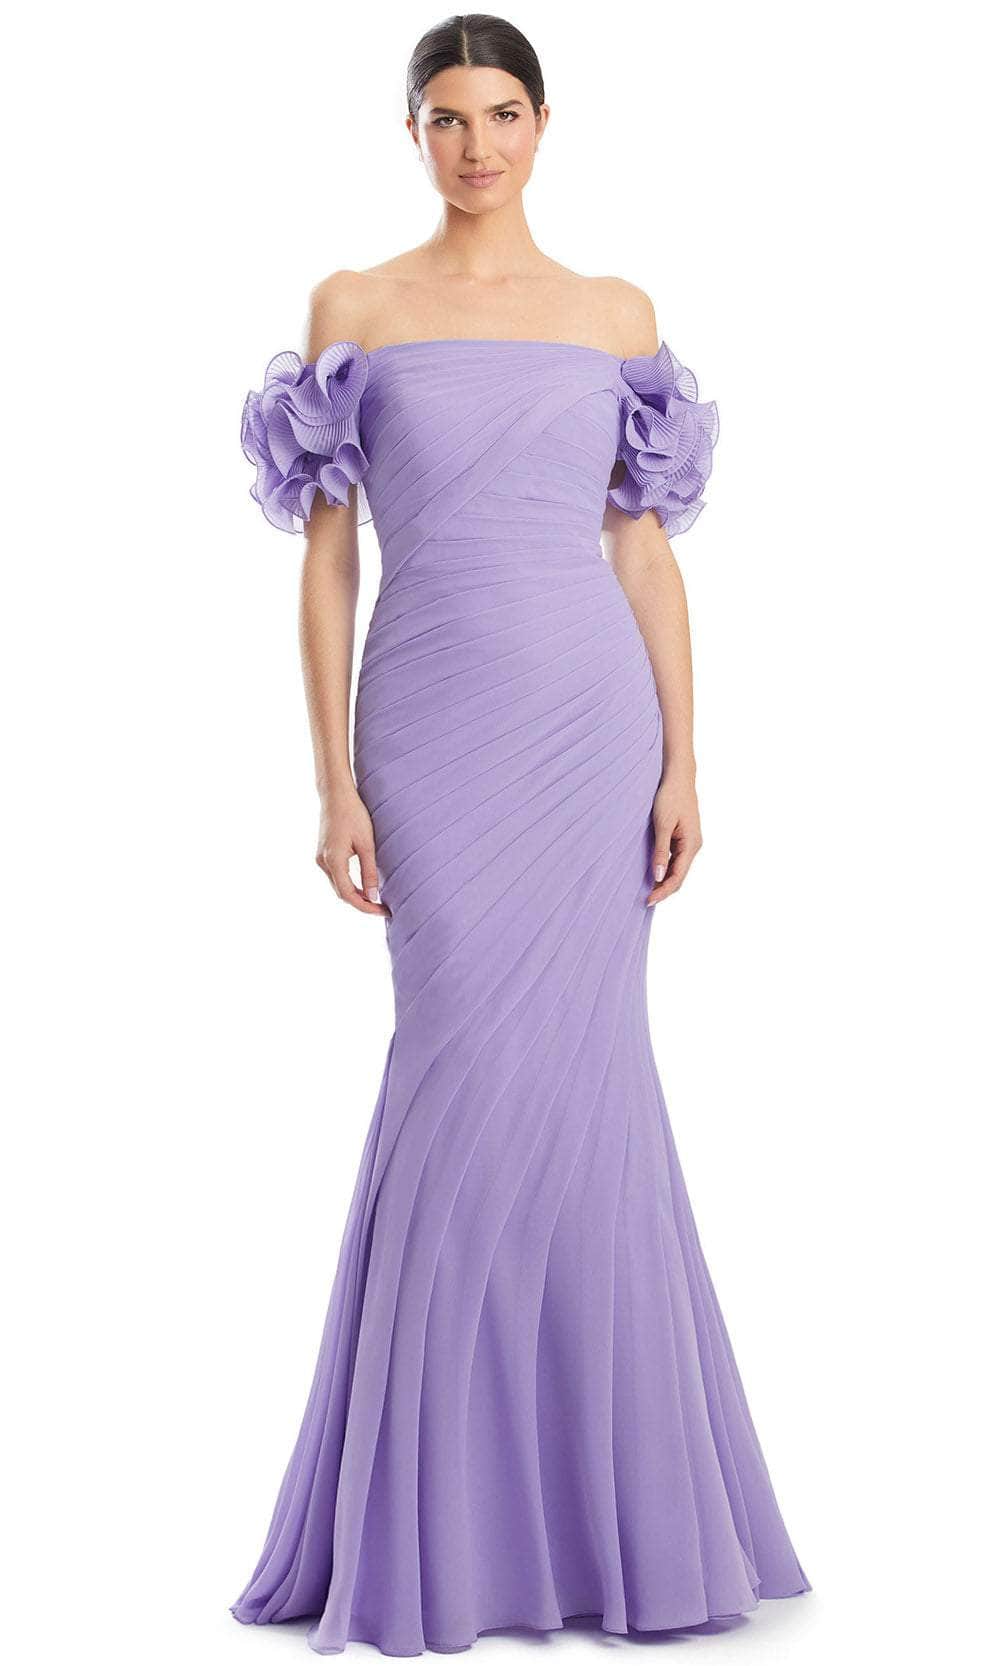 Image of Alexander by Daymor 1992S24 - Off-Shoulder Ruffle Detailed Prom Dress